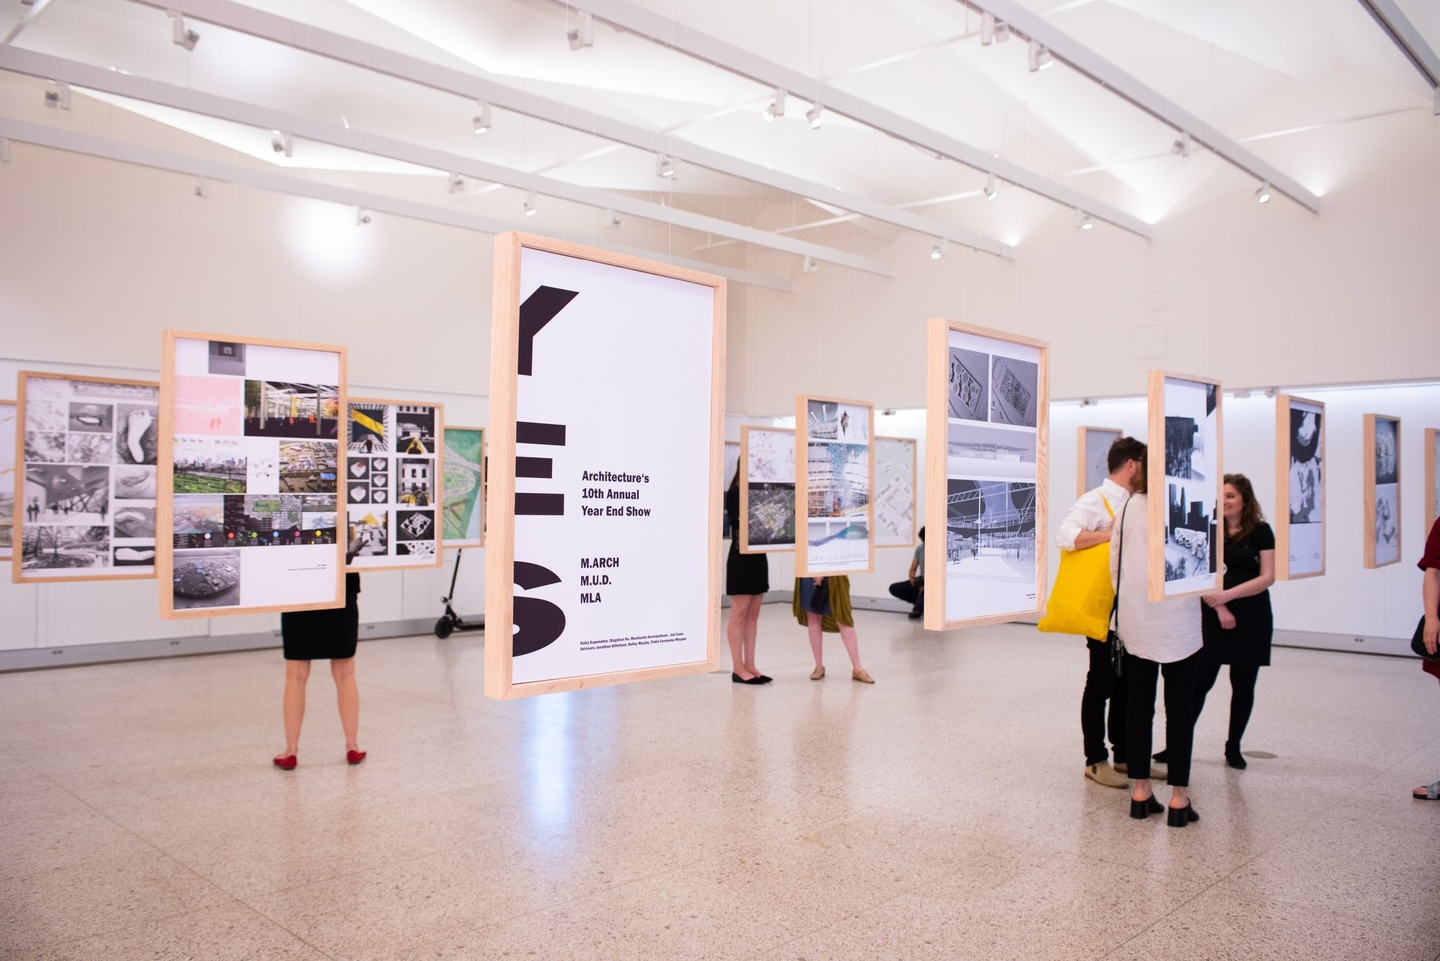 An exhibition of architectural drawings. Work hangs in simple, blonde wood frames, suspended from the pleated ceiling by invisible lines. People are gathered in small groups around the work. 